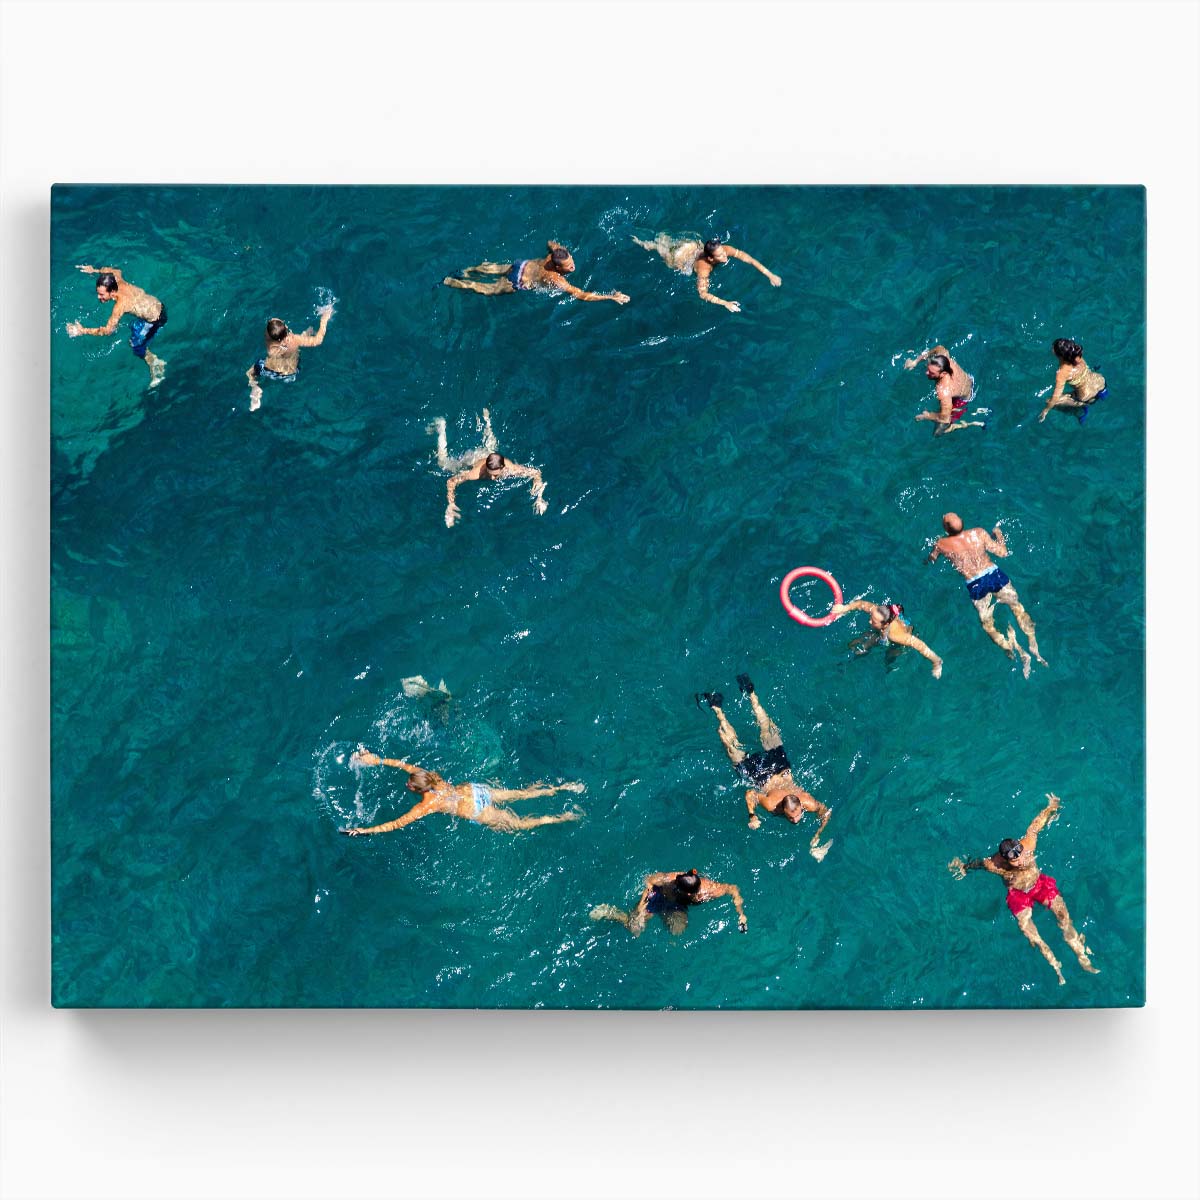 Summer Bliss Aerial Ocean Swim in Puglia, Italy Wall Art by Luxuriance Designs. Made in USA.